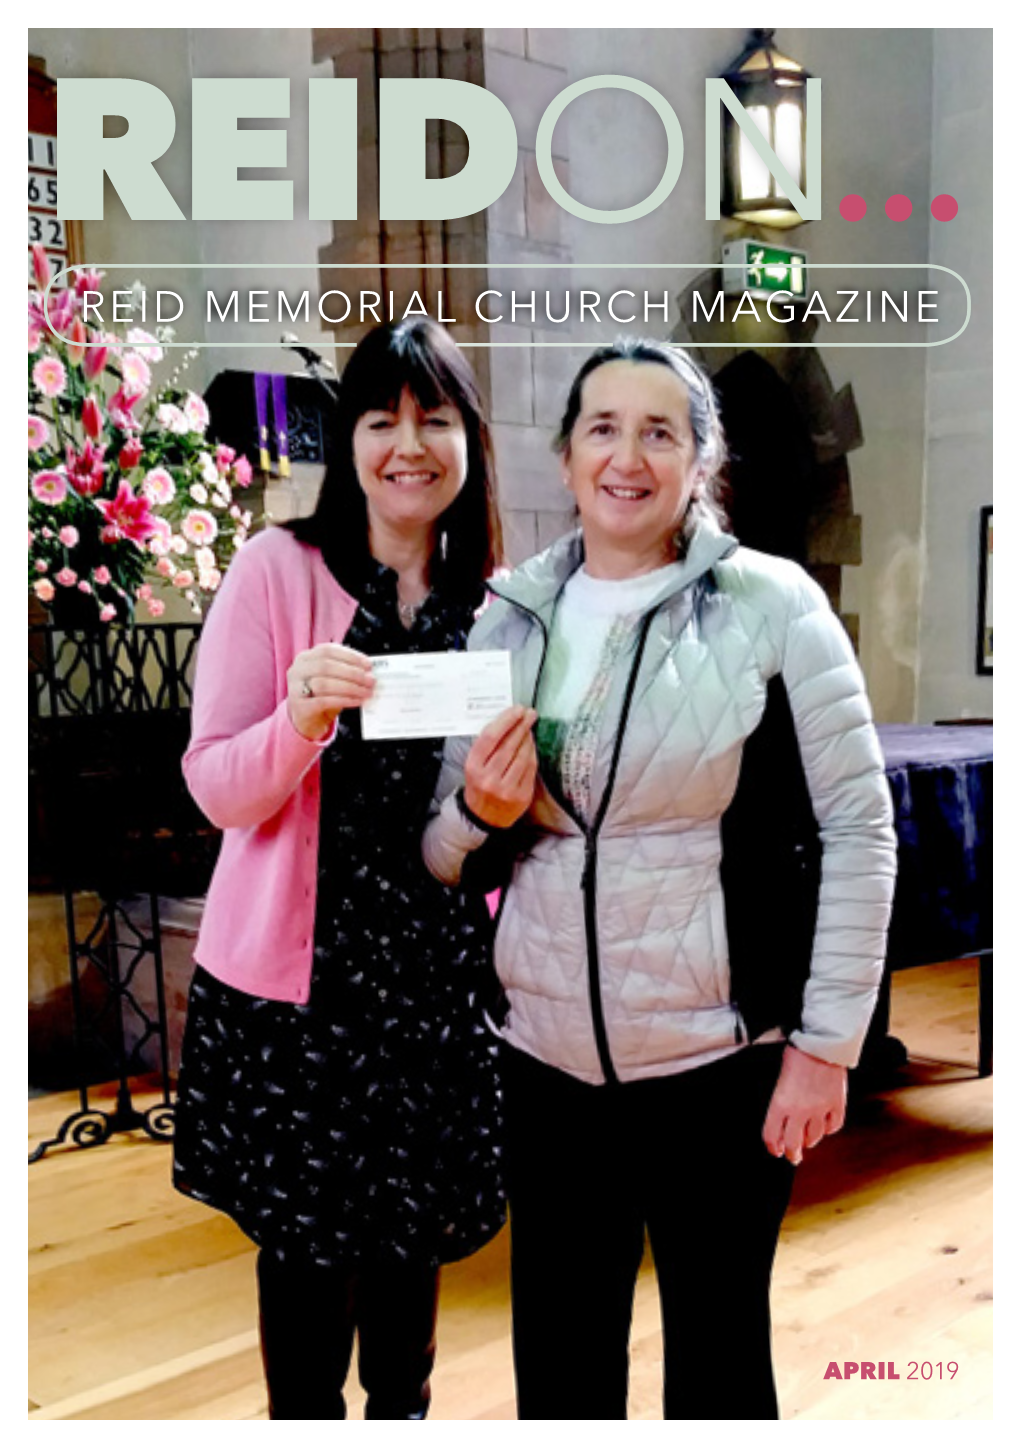 APRIL 2019 APRIL 2019 FRONT COVER: Rebecca from Hopscotch Children's Charity Accepts a Cheque for £500 from Katrina Russell, 24Th March